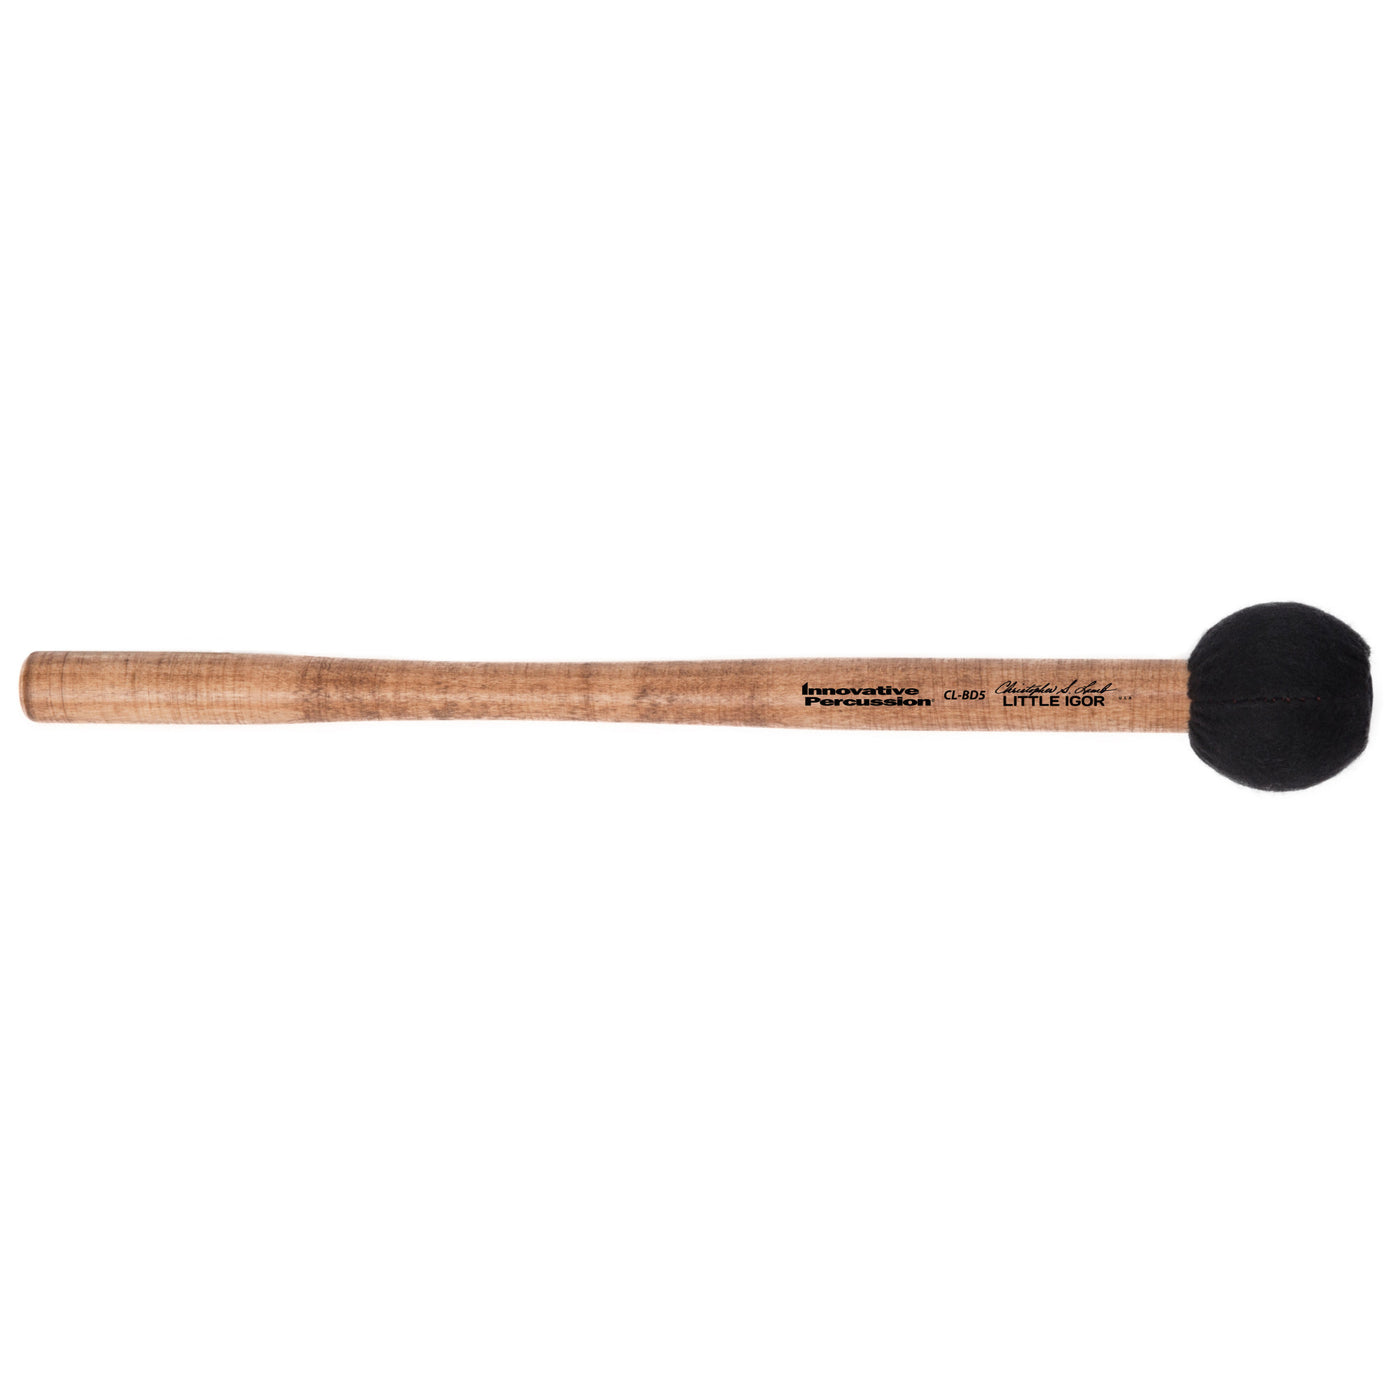 Innovative Percussion CL-BD5 Drum Mallet